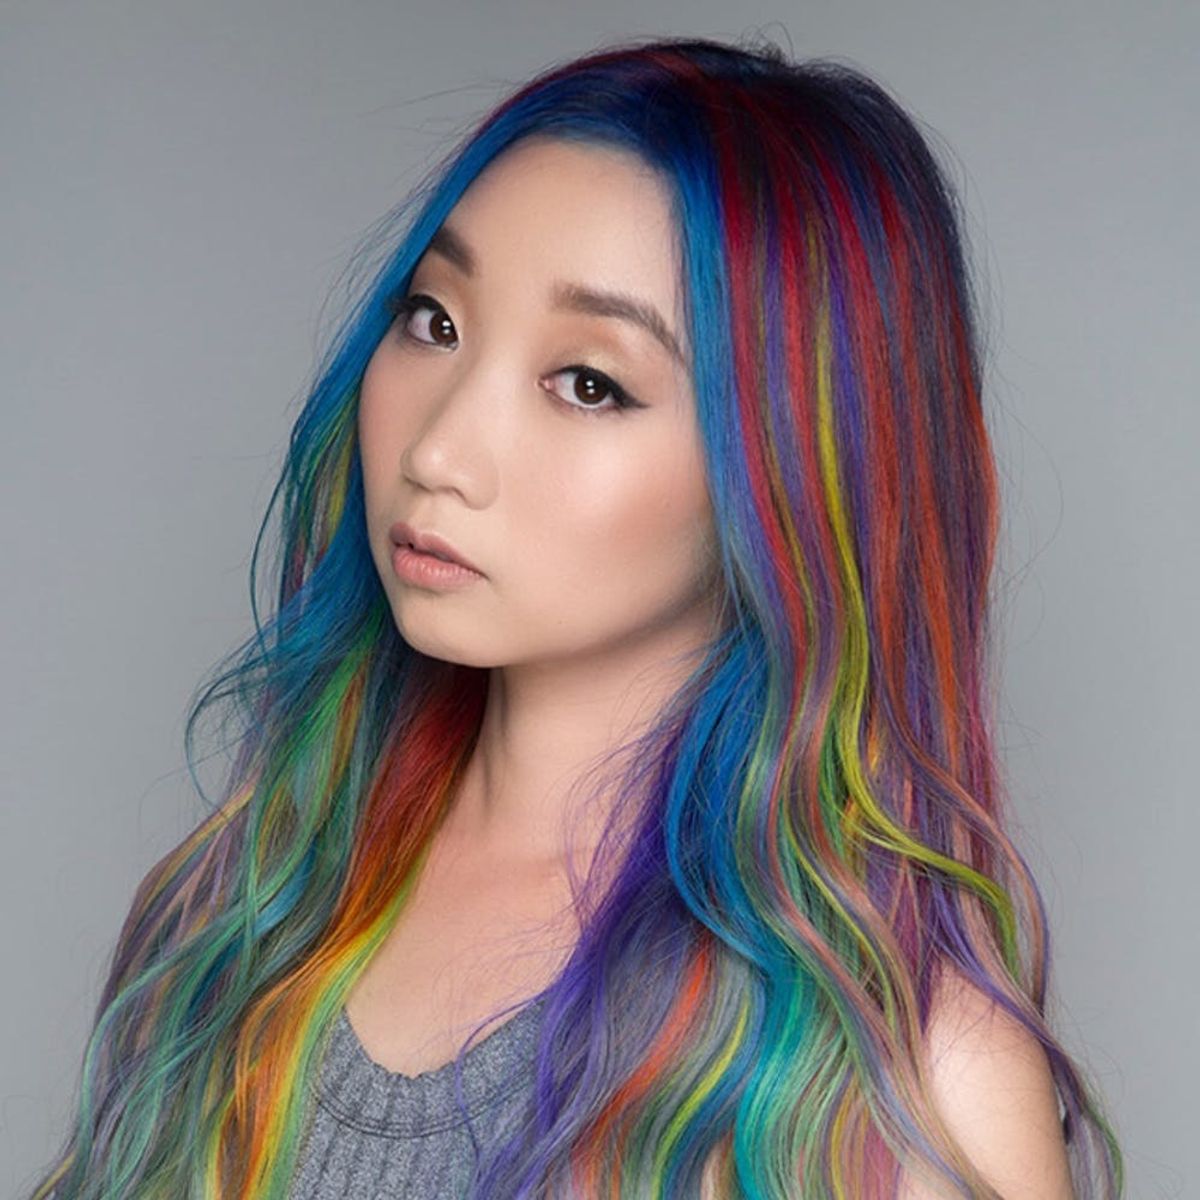 You Have to See What 34 Hair Colors Look Like on One Person